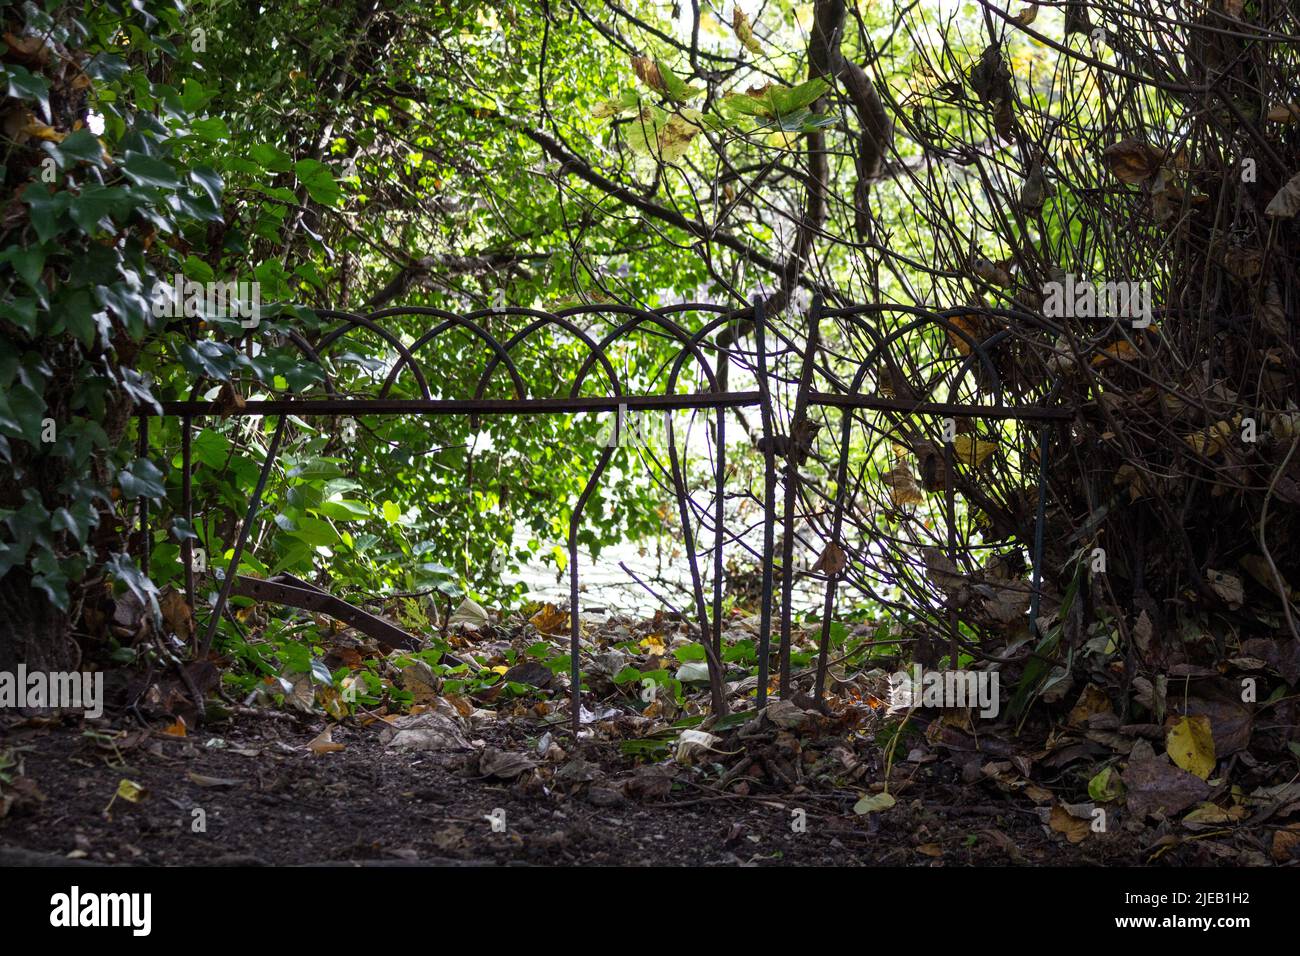 Blocked Off Pathway to Water, Metal Fencing Stock Photo